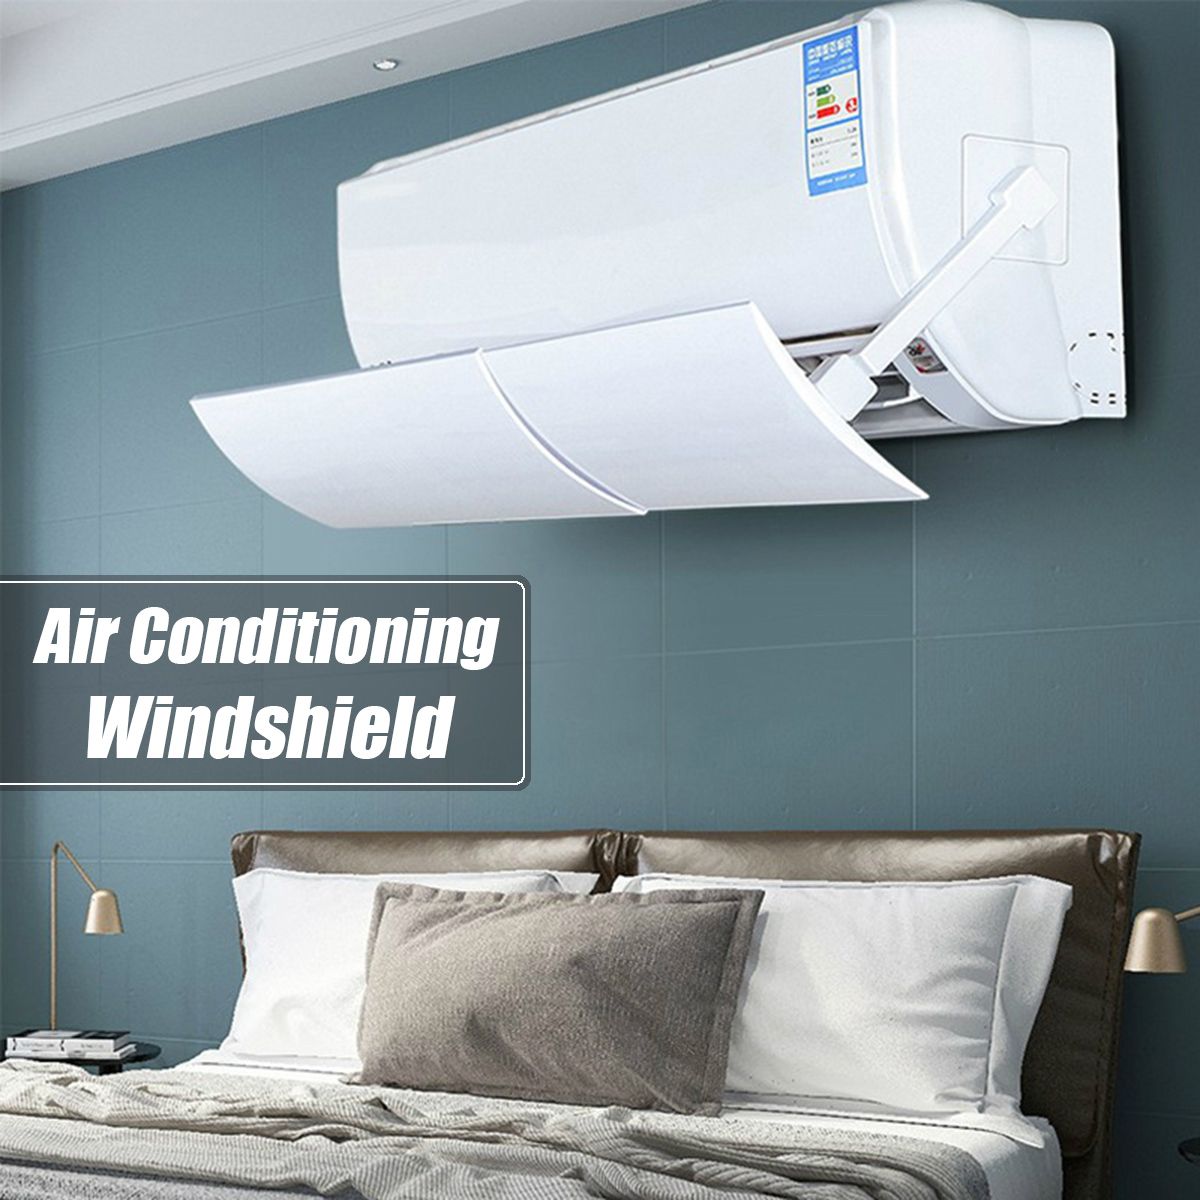 Air-Conditioner-Cover-Windshield-Conditioning-Baffle-Shield-Adjustable-Anti-wind-1630533